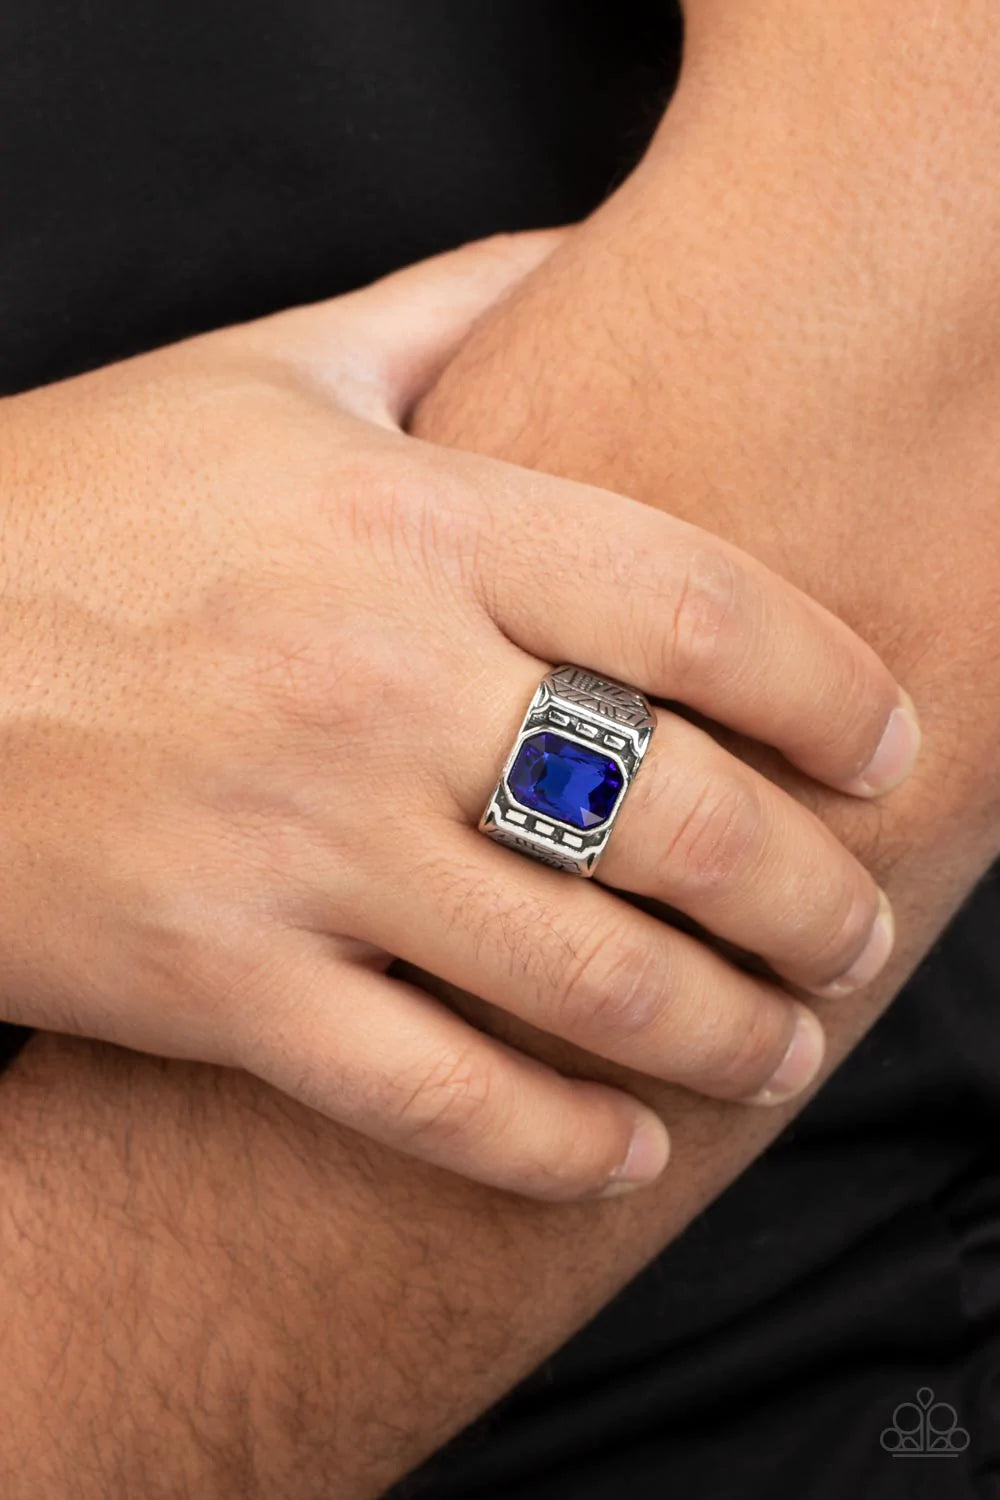 Paparazzi Accessories Metro Magnate - Blue A majestic emerald cut blue rhinestone is pressed into the center of a rectangular studded silver frame flanked by geometric texture, creating an edgy centerpiece atop the finger. Features a stretchy band for a f